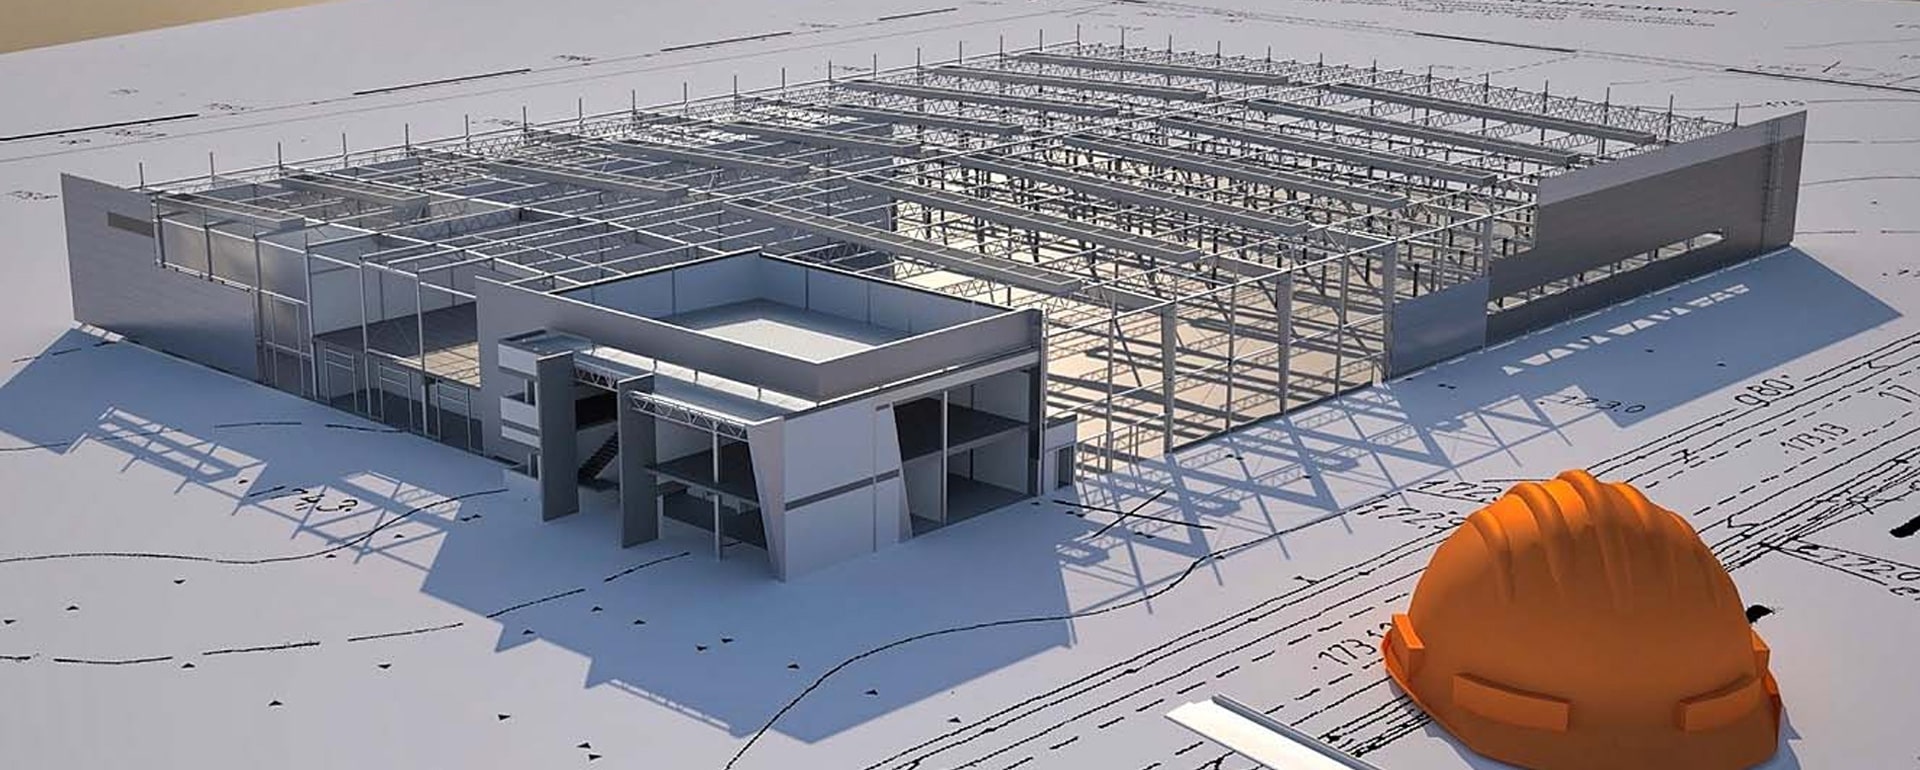 Architectural miscellaneous steel detailing in india - Tekla structures steel detailing in india